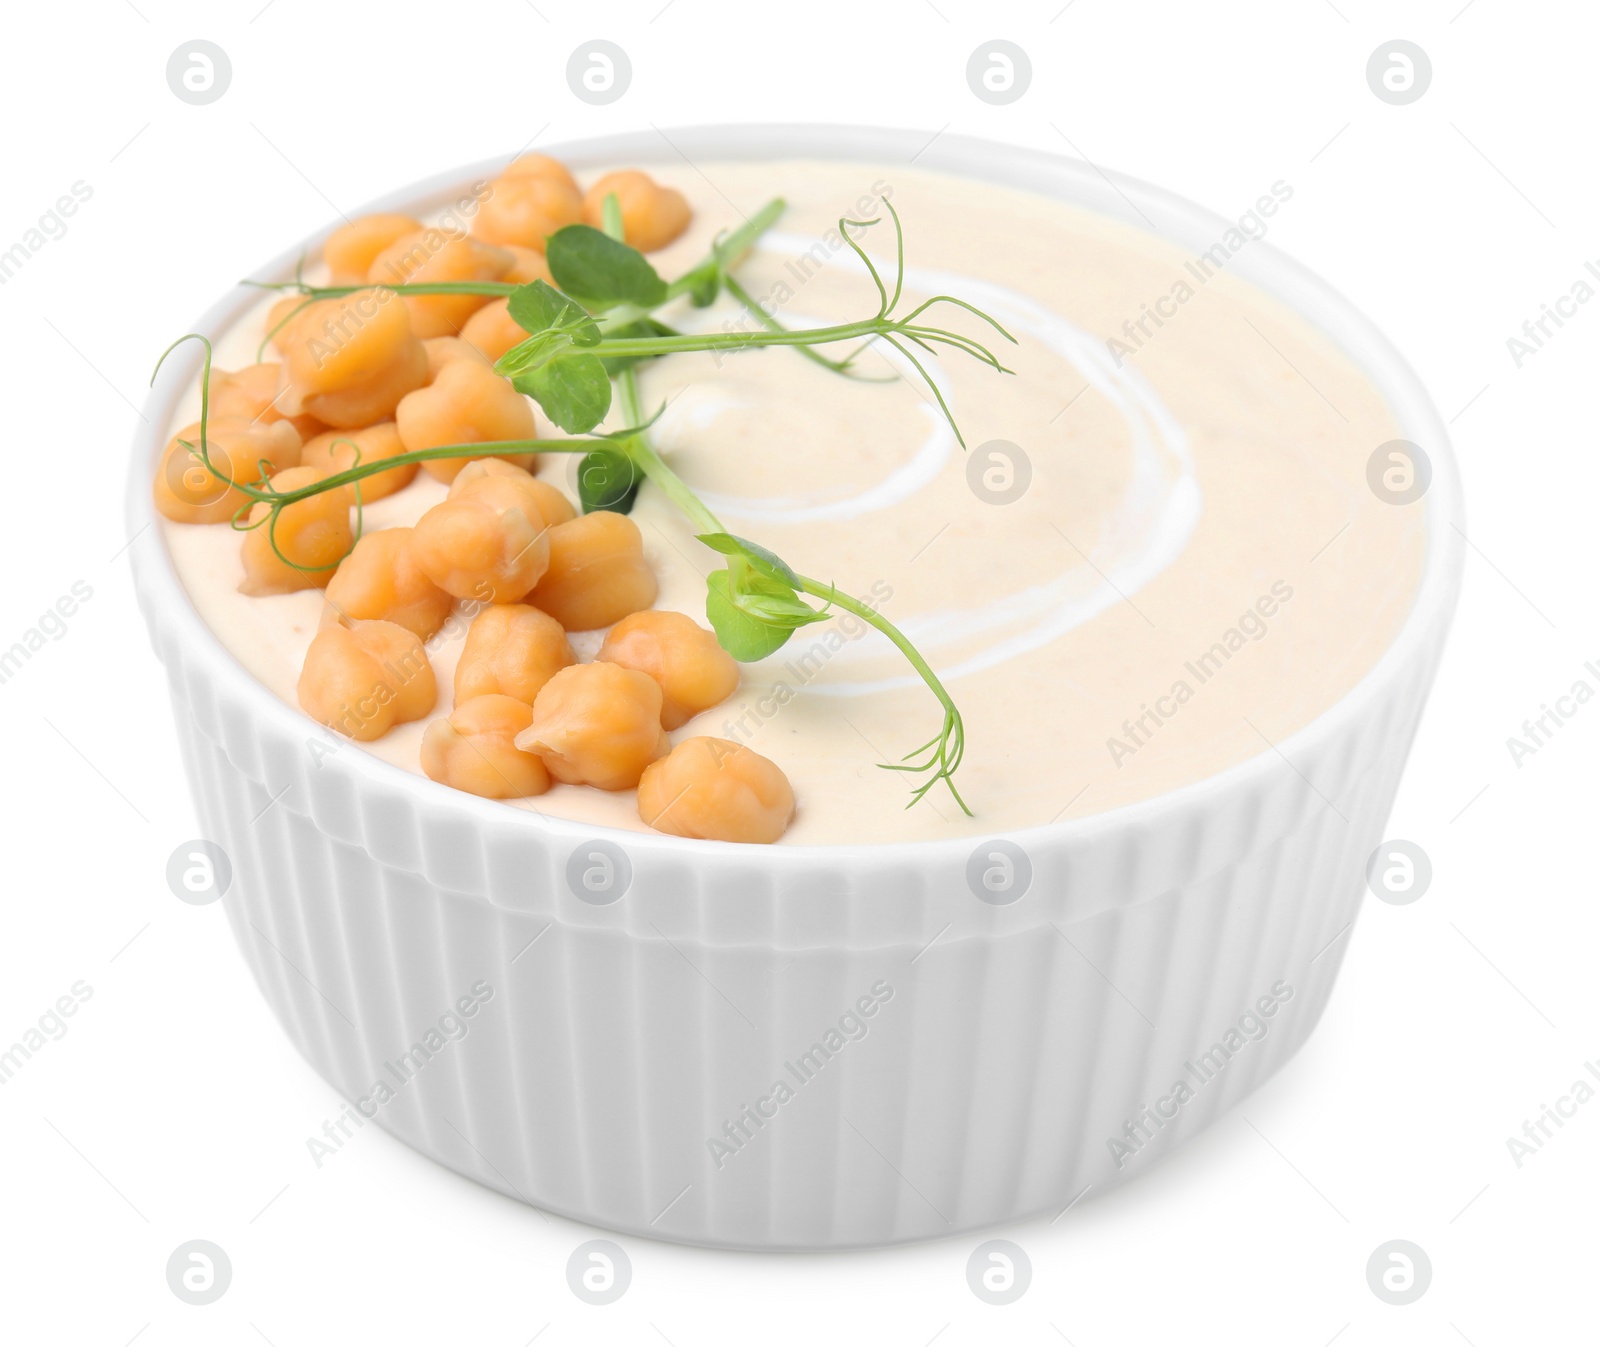 Photo of Tasty chickpea soup in bowl on white background